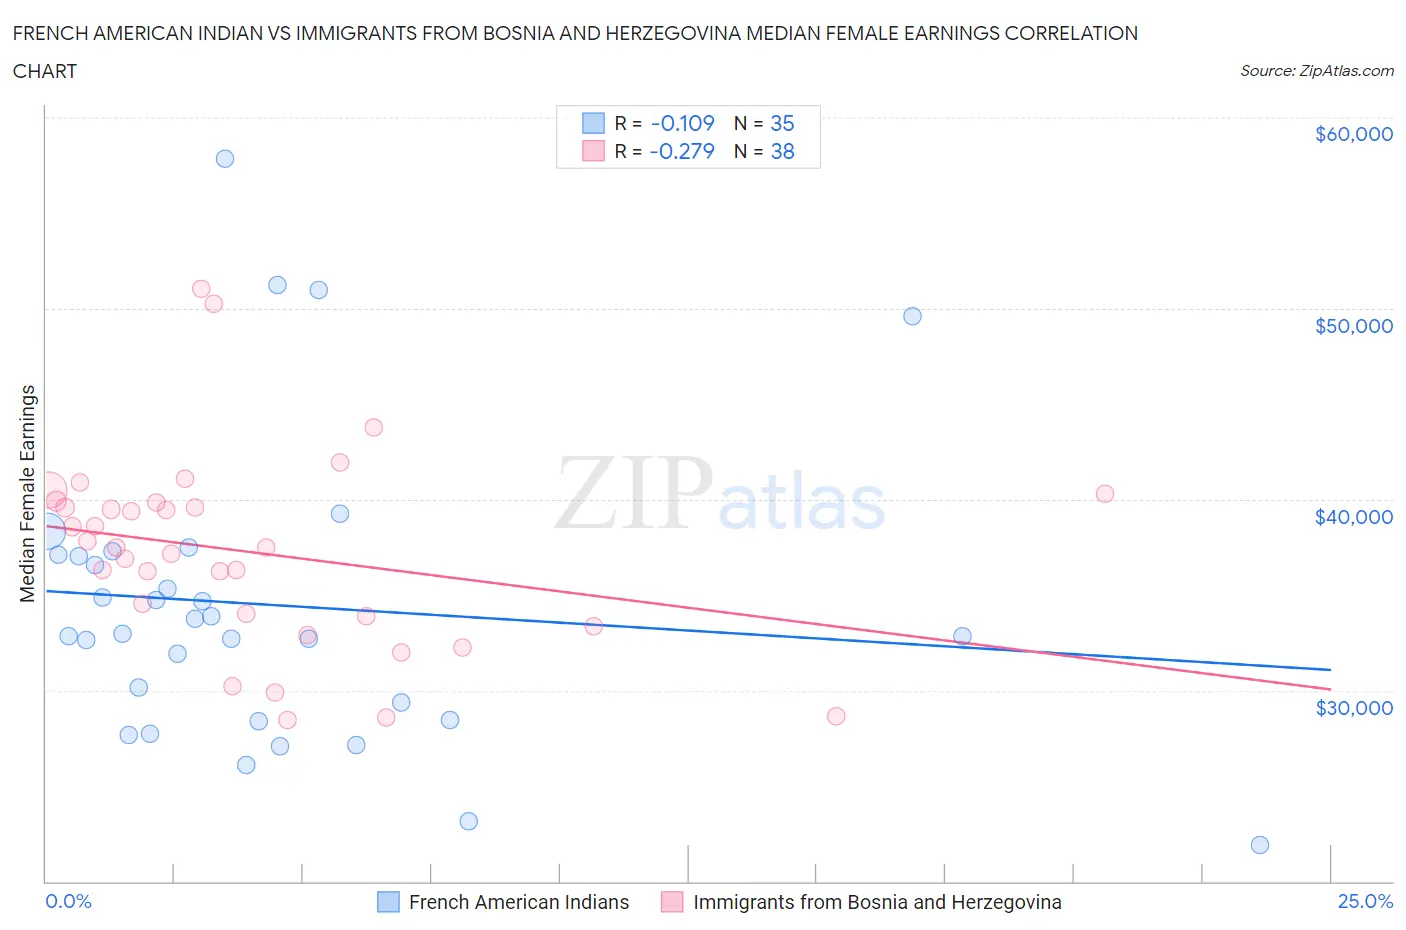 French American Indian vs Immigrants from Bosnia and Herzegovina Median Female Earnings